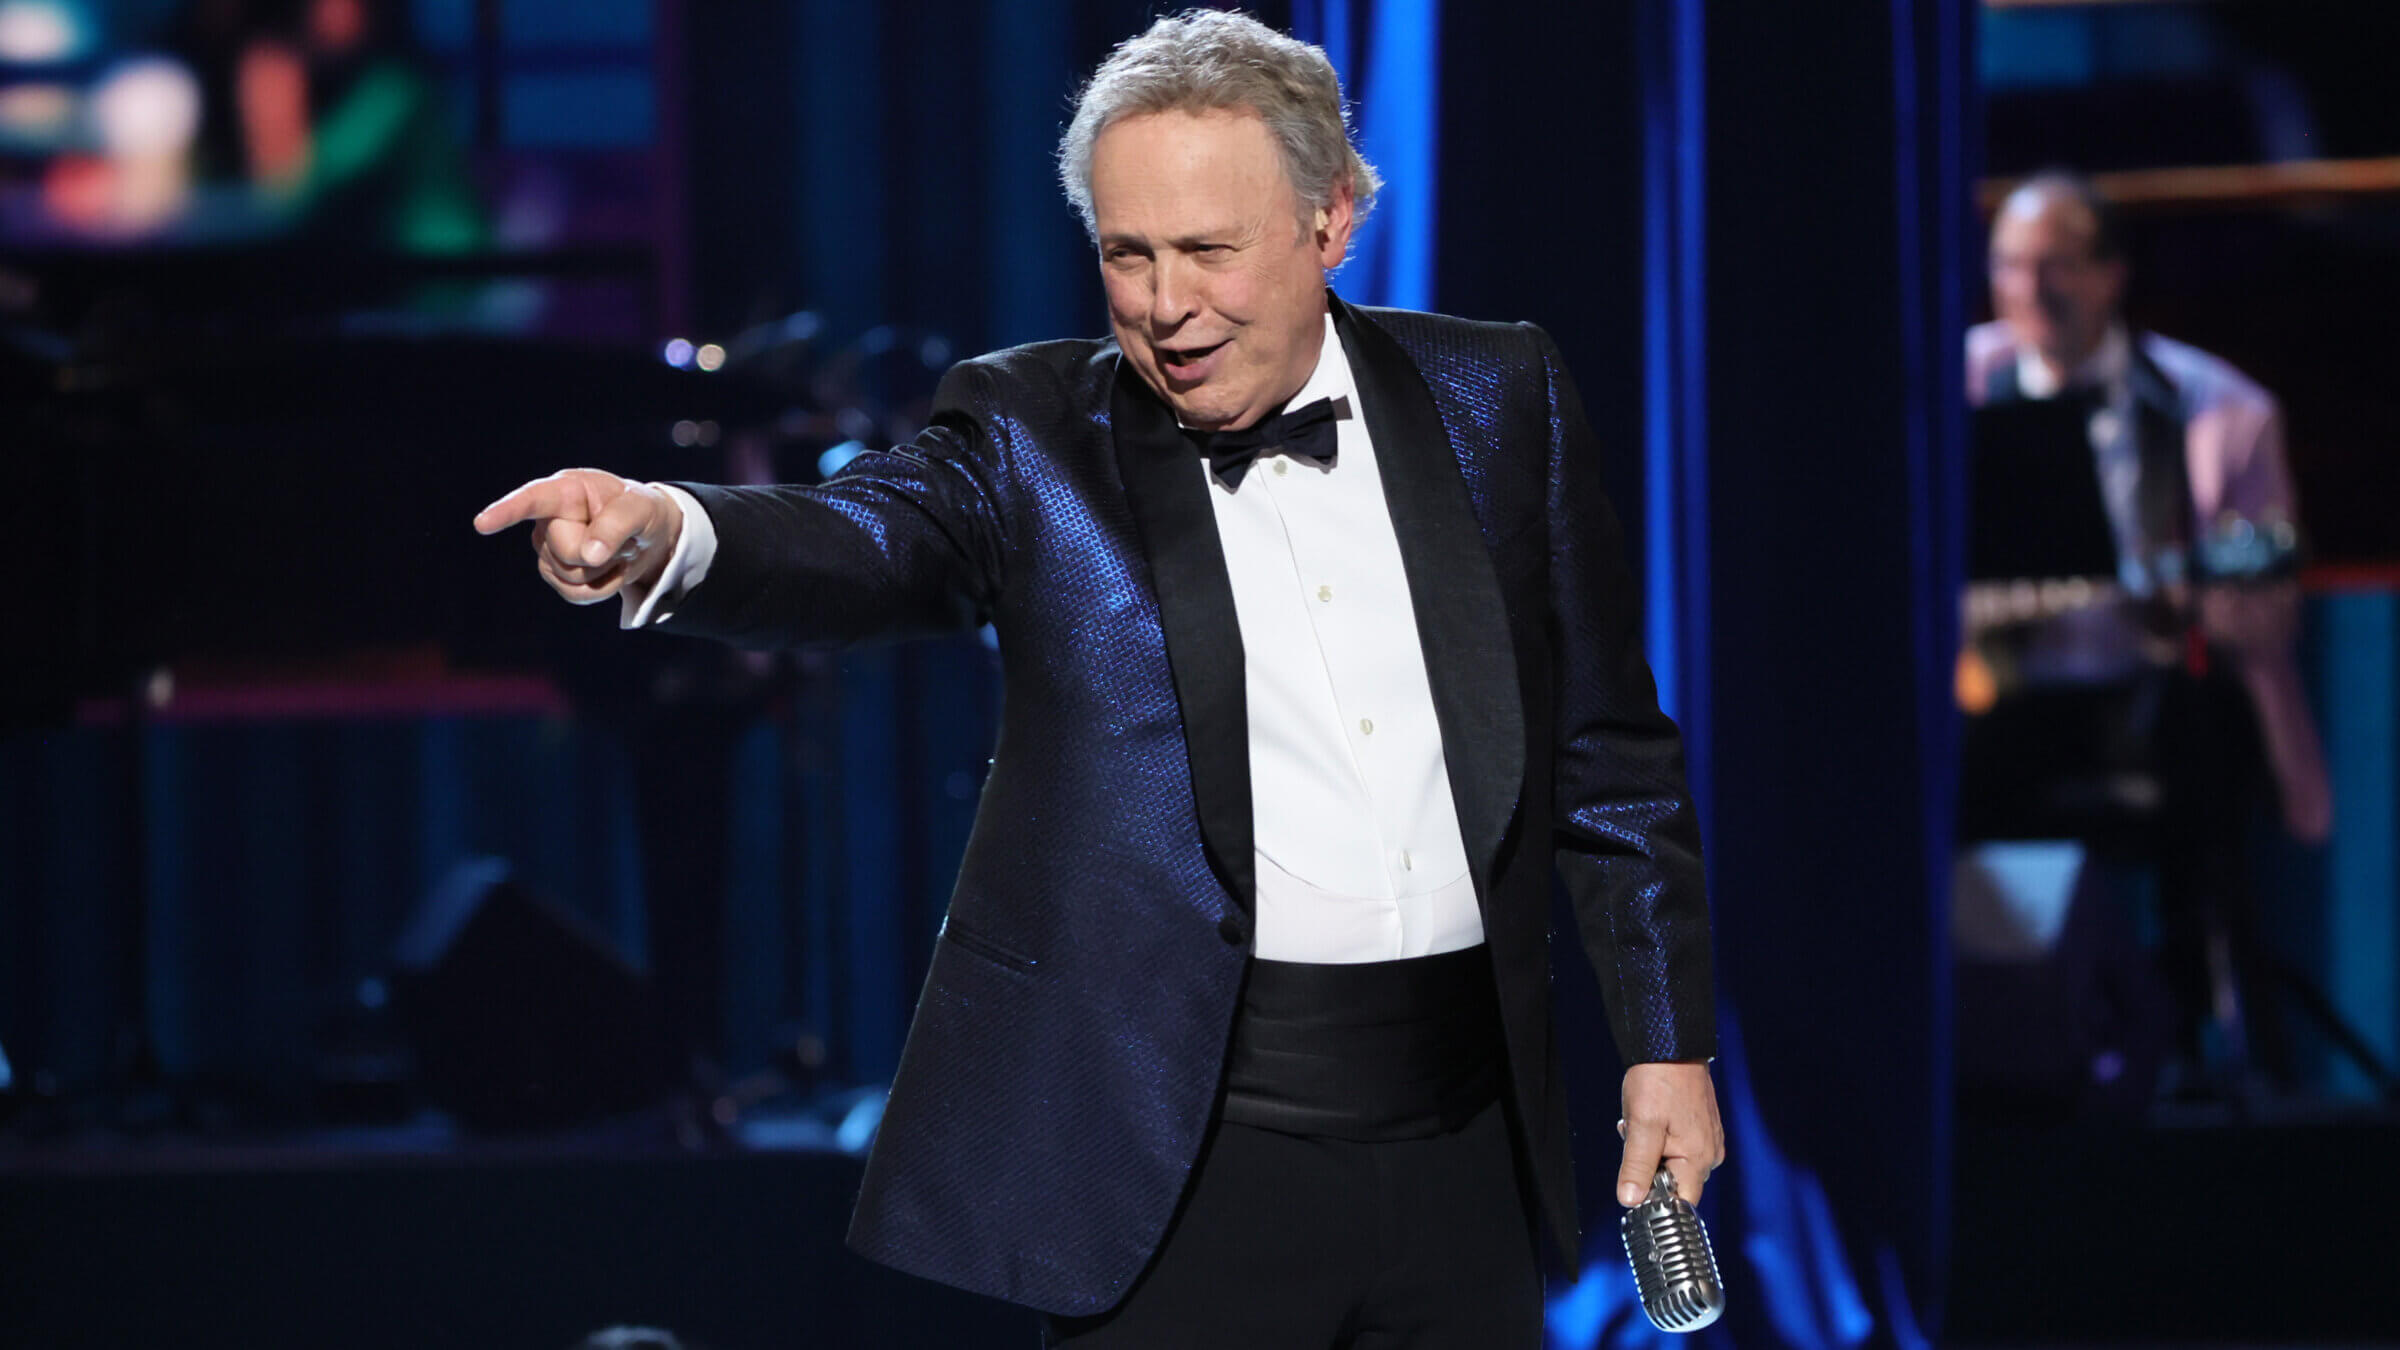 Billy Crystal led the audience at the 75th Tony Awards in faux-Yiddish call-and-response.